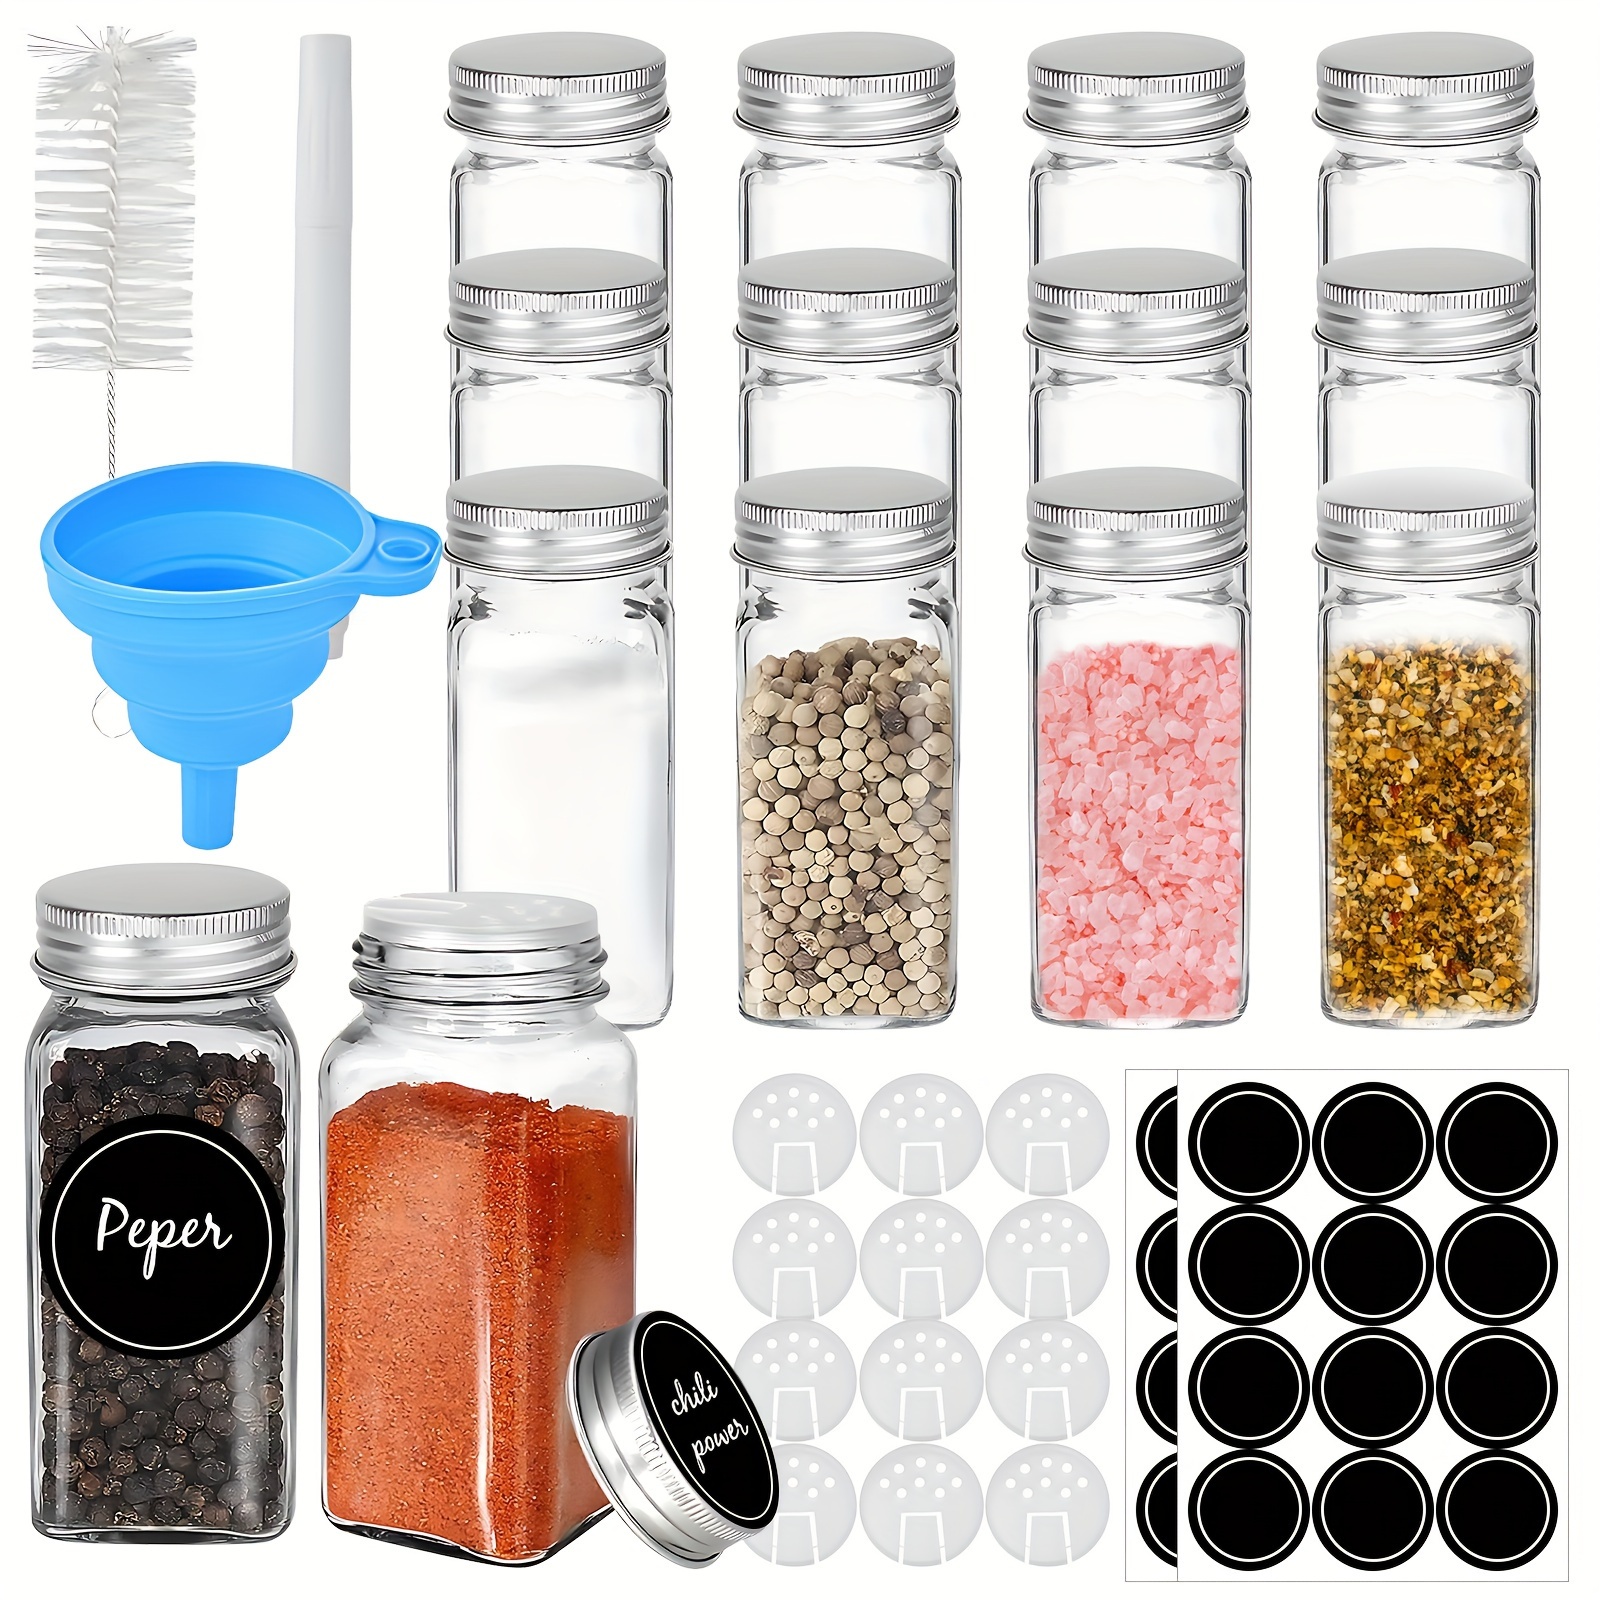 24 Pcs Glass Spice Jars with Spice & Pantry labels - 4oz Empty Square Spice  Containers Bottles Shaker Lids and Airtight Metal Caps - Measuring Spoons  Set and Silicone Funnel Included